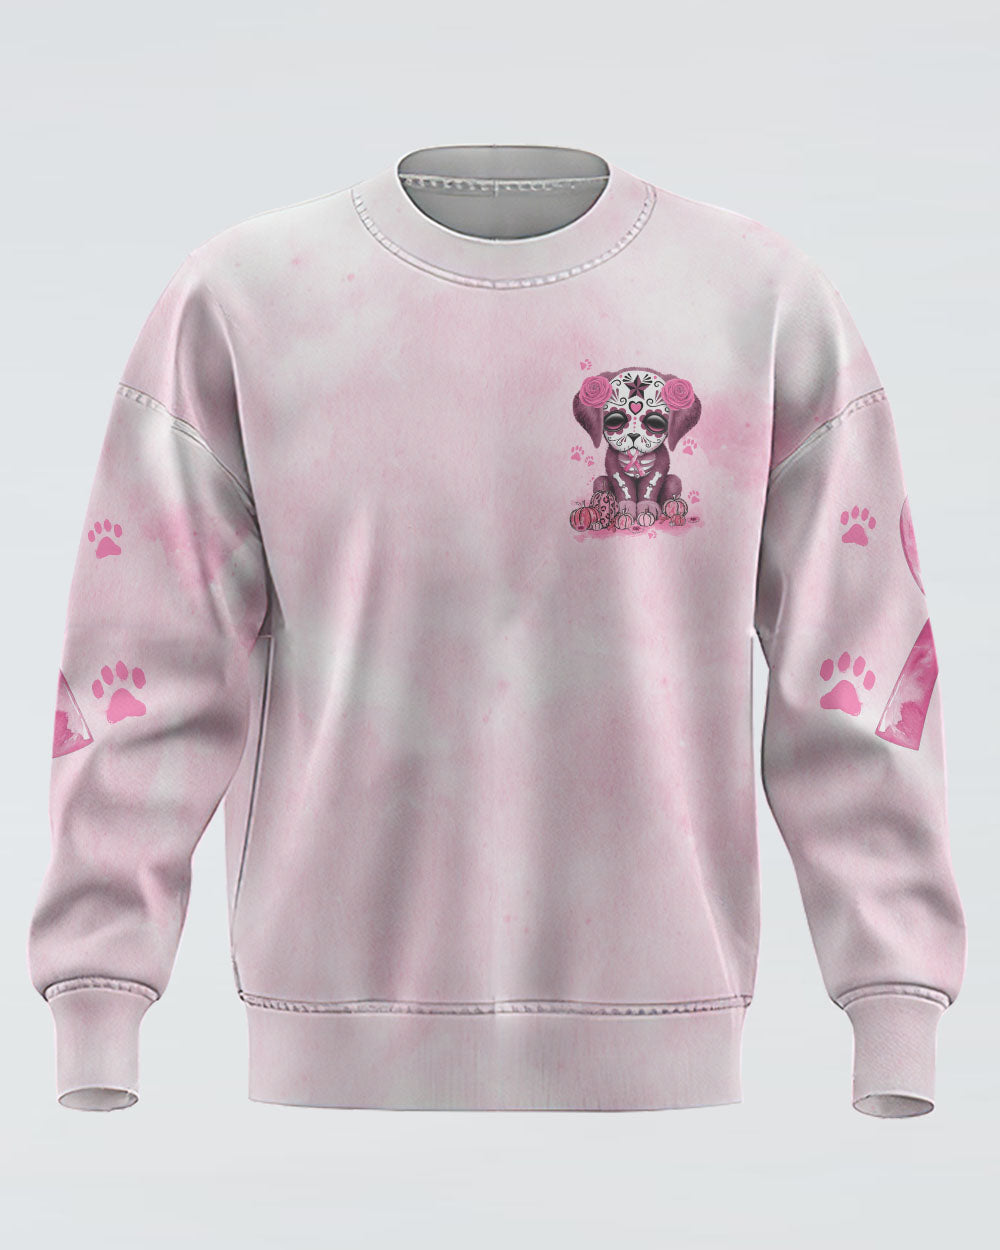 Paws For The Cure Dog Women's Breast Cancer Awareness Sweatshirt